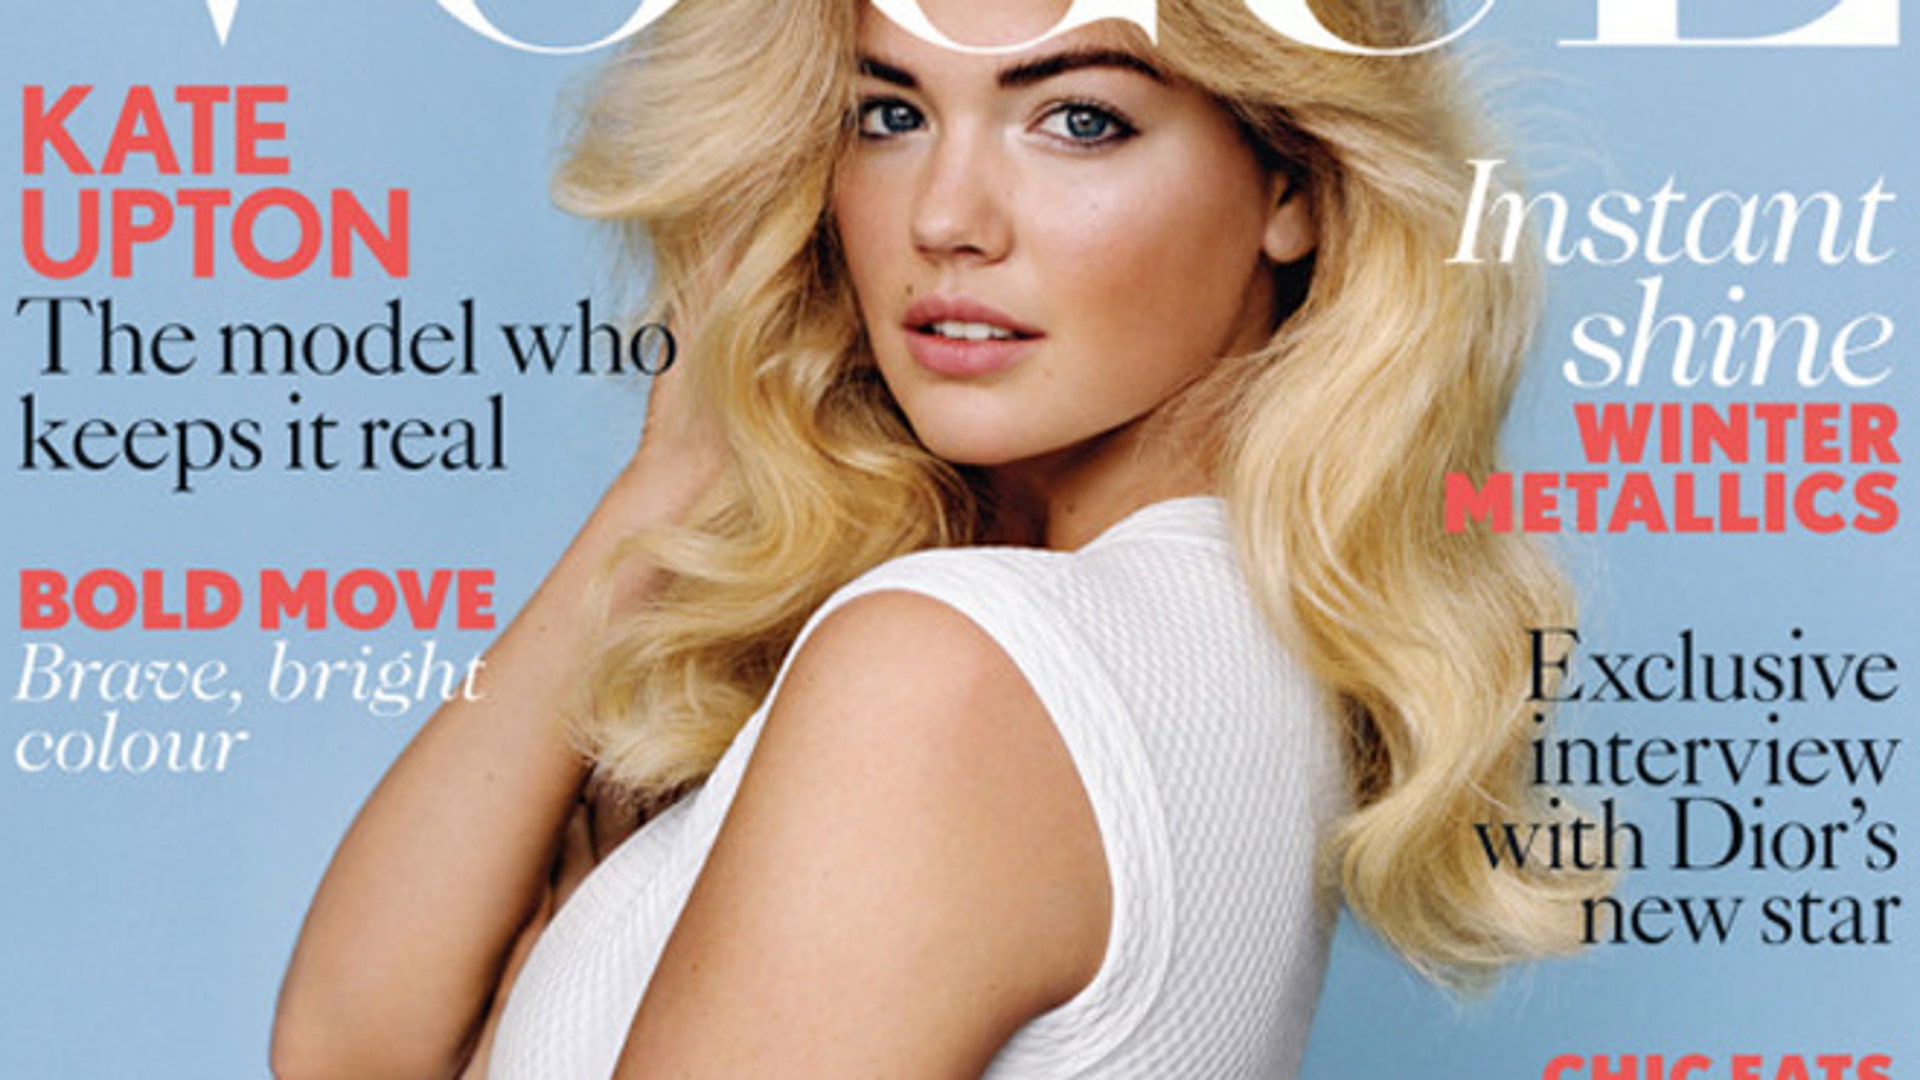 The lovely and talented Kate Upton | Fox News